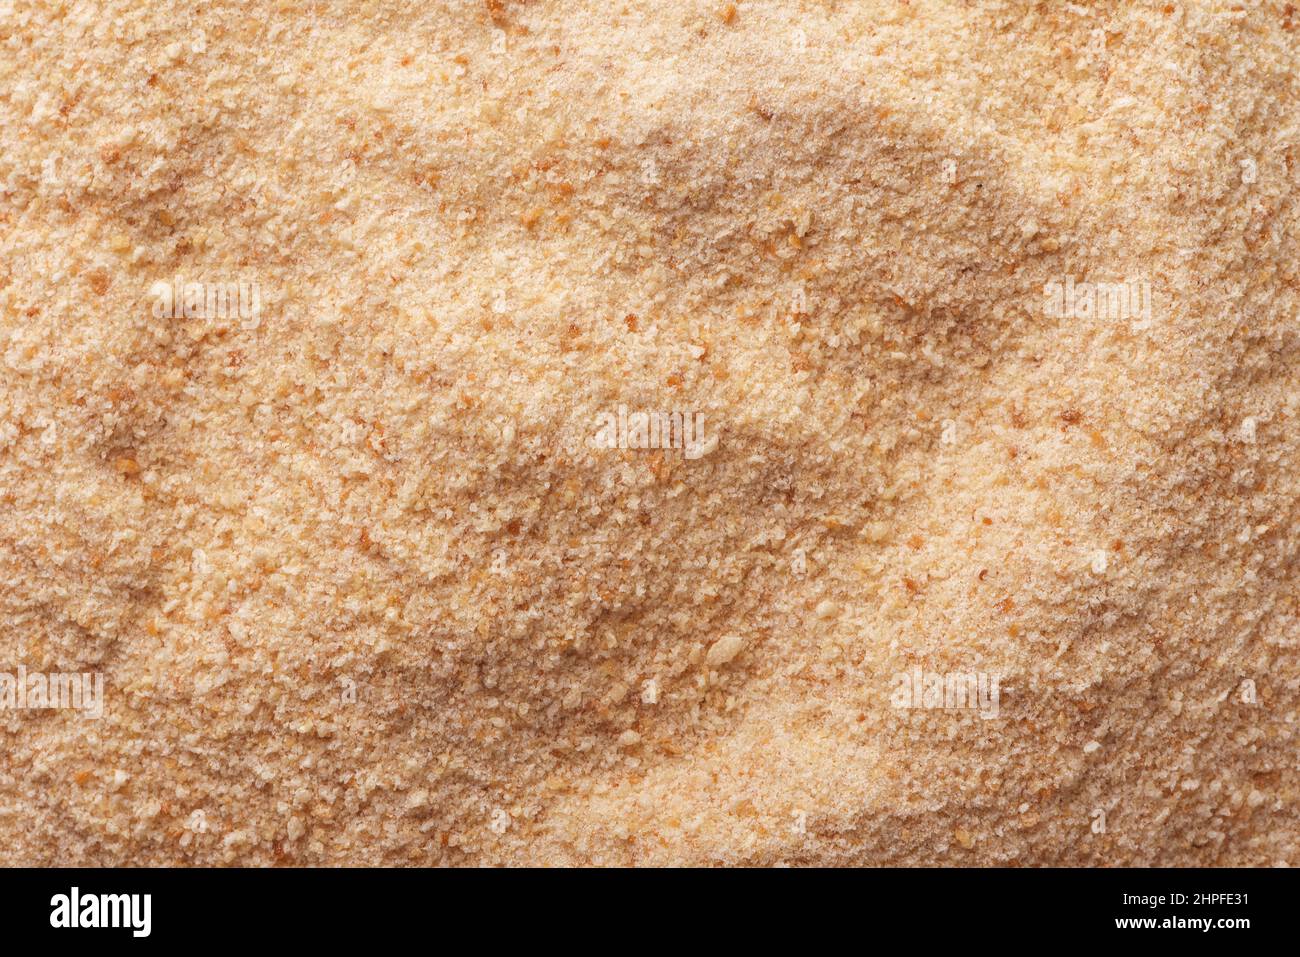 Background of golden roasted breadcrumbs texture Stock Photo